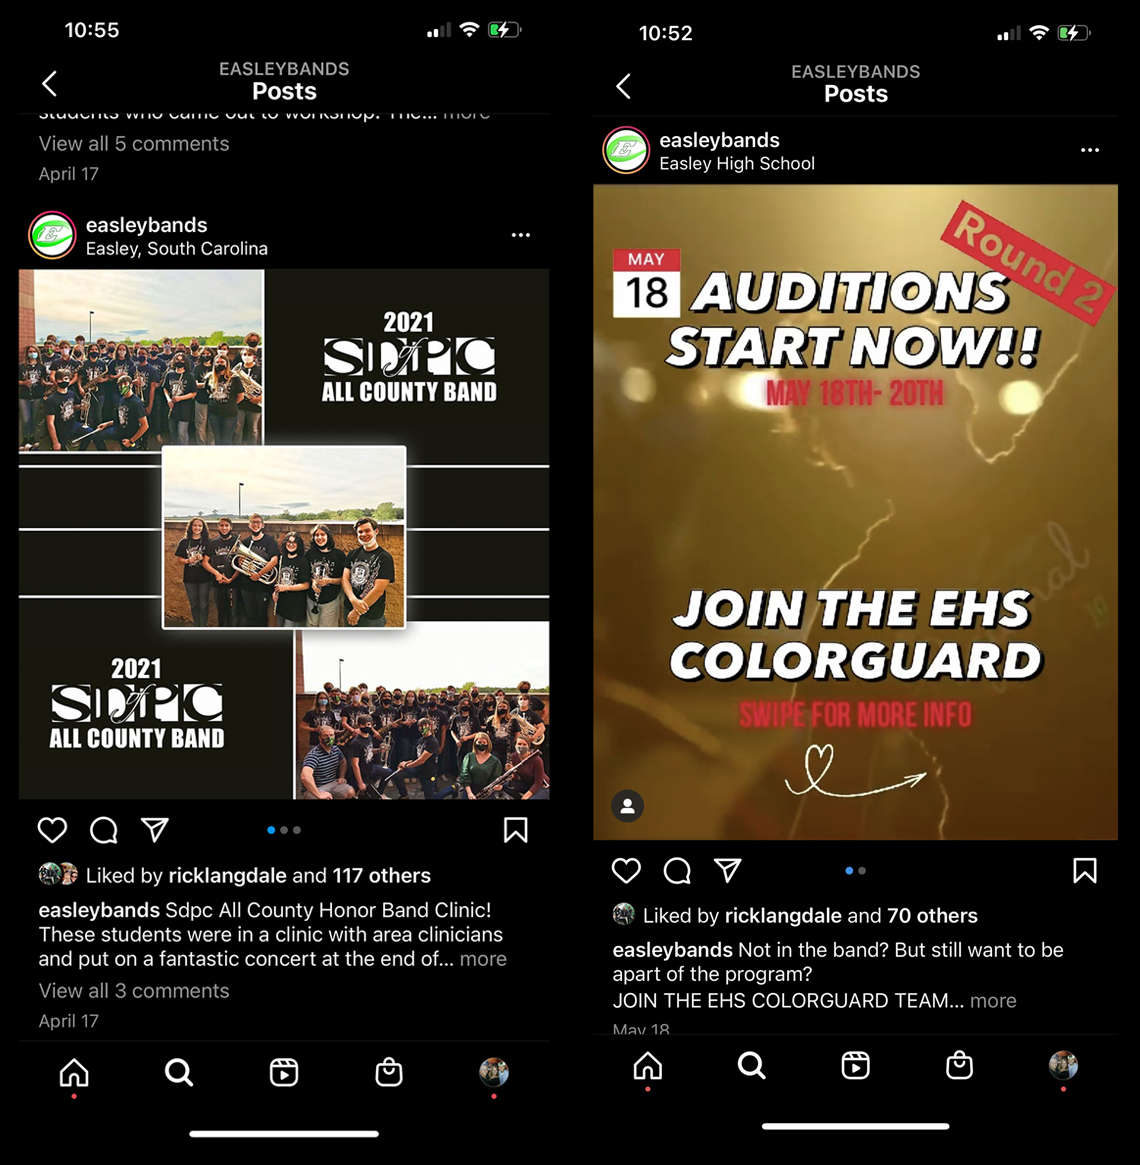 Easley Bands Instagram post promoting students in the All County Band (left), Instagram post promoting color guard auditions (right)